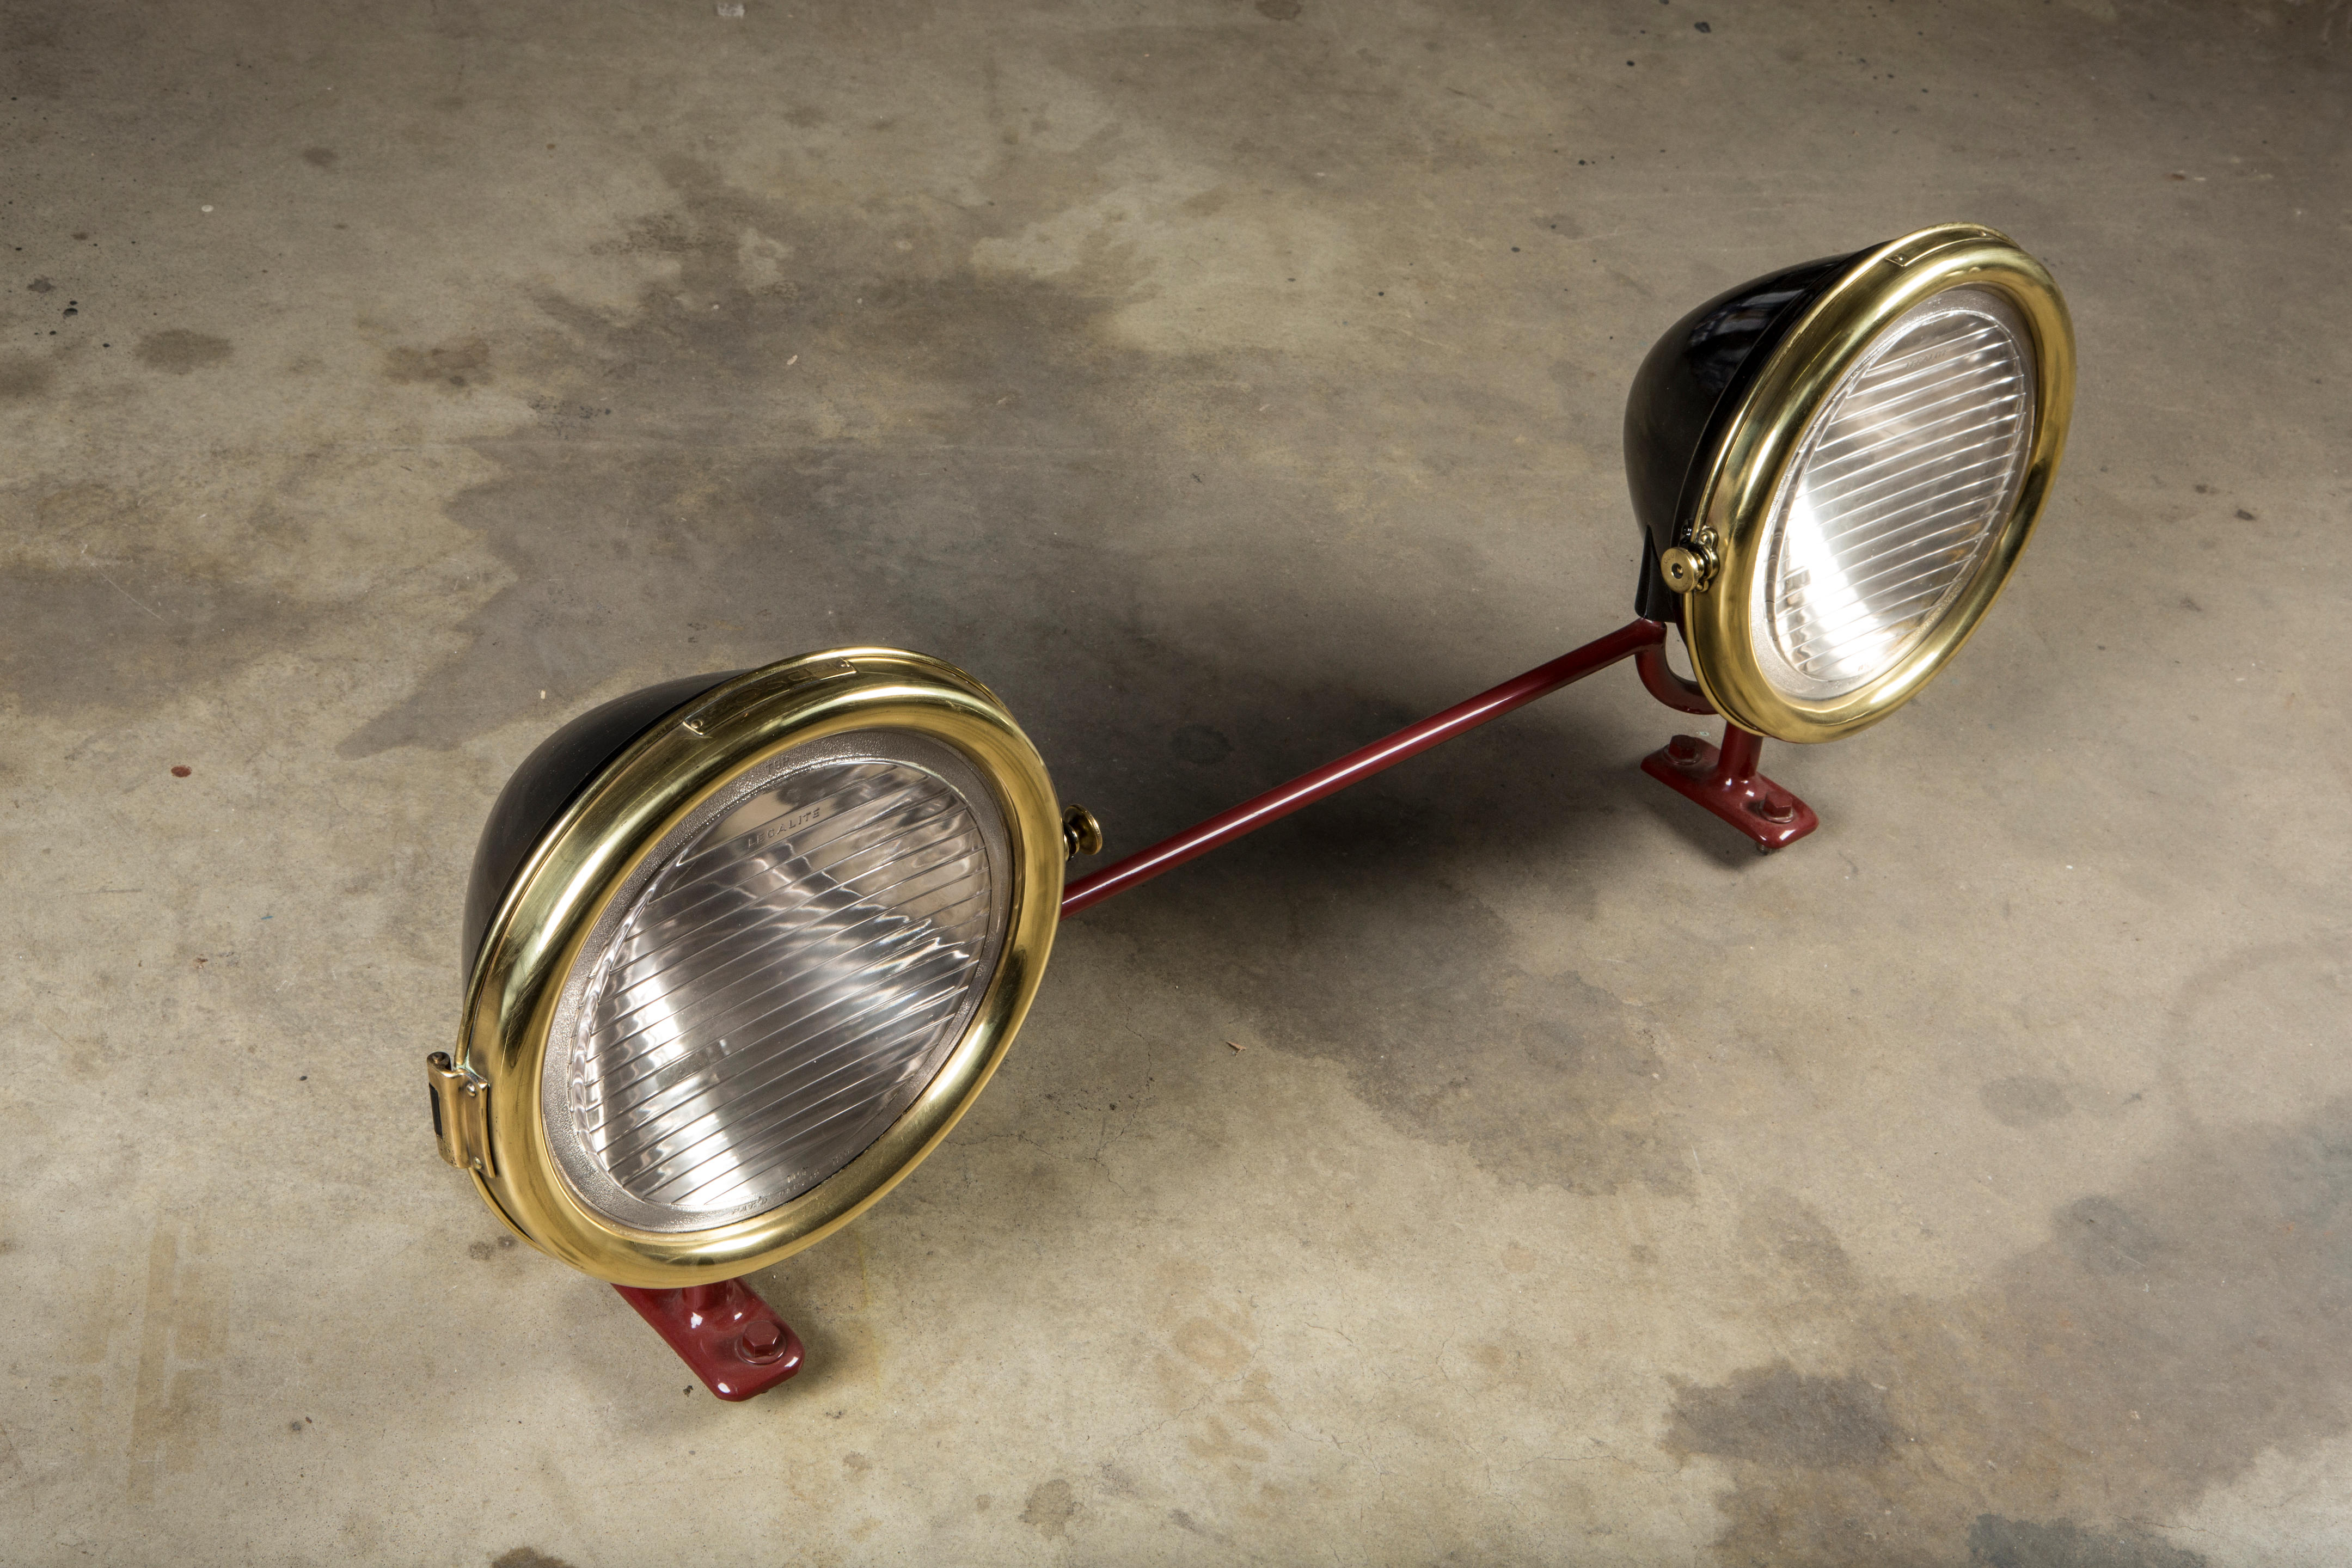 A PAIR OF 'LEGALITE' ELECTRIC HEADLIGHTS BY BOSCH, CIRCA 1917,